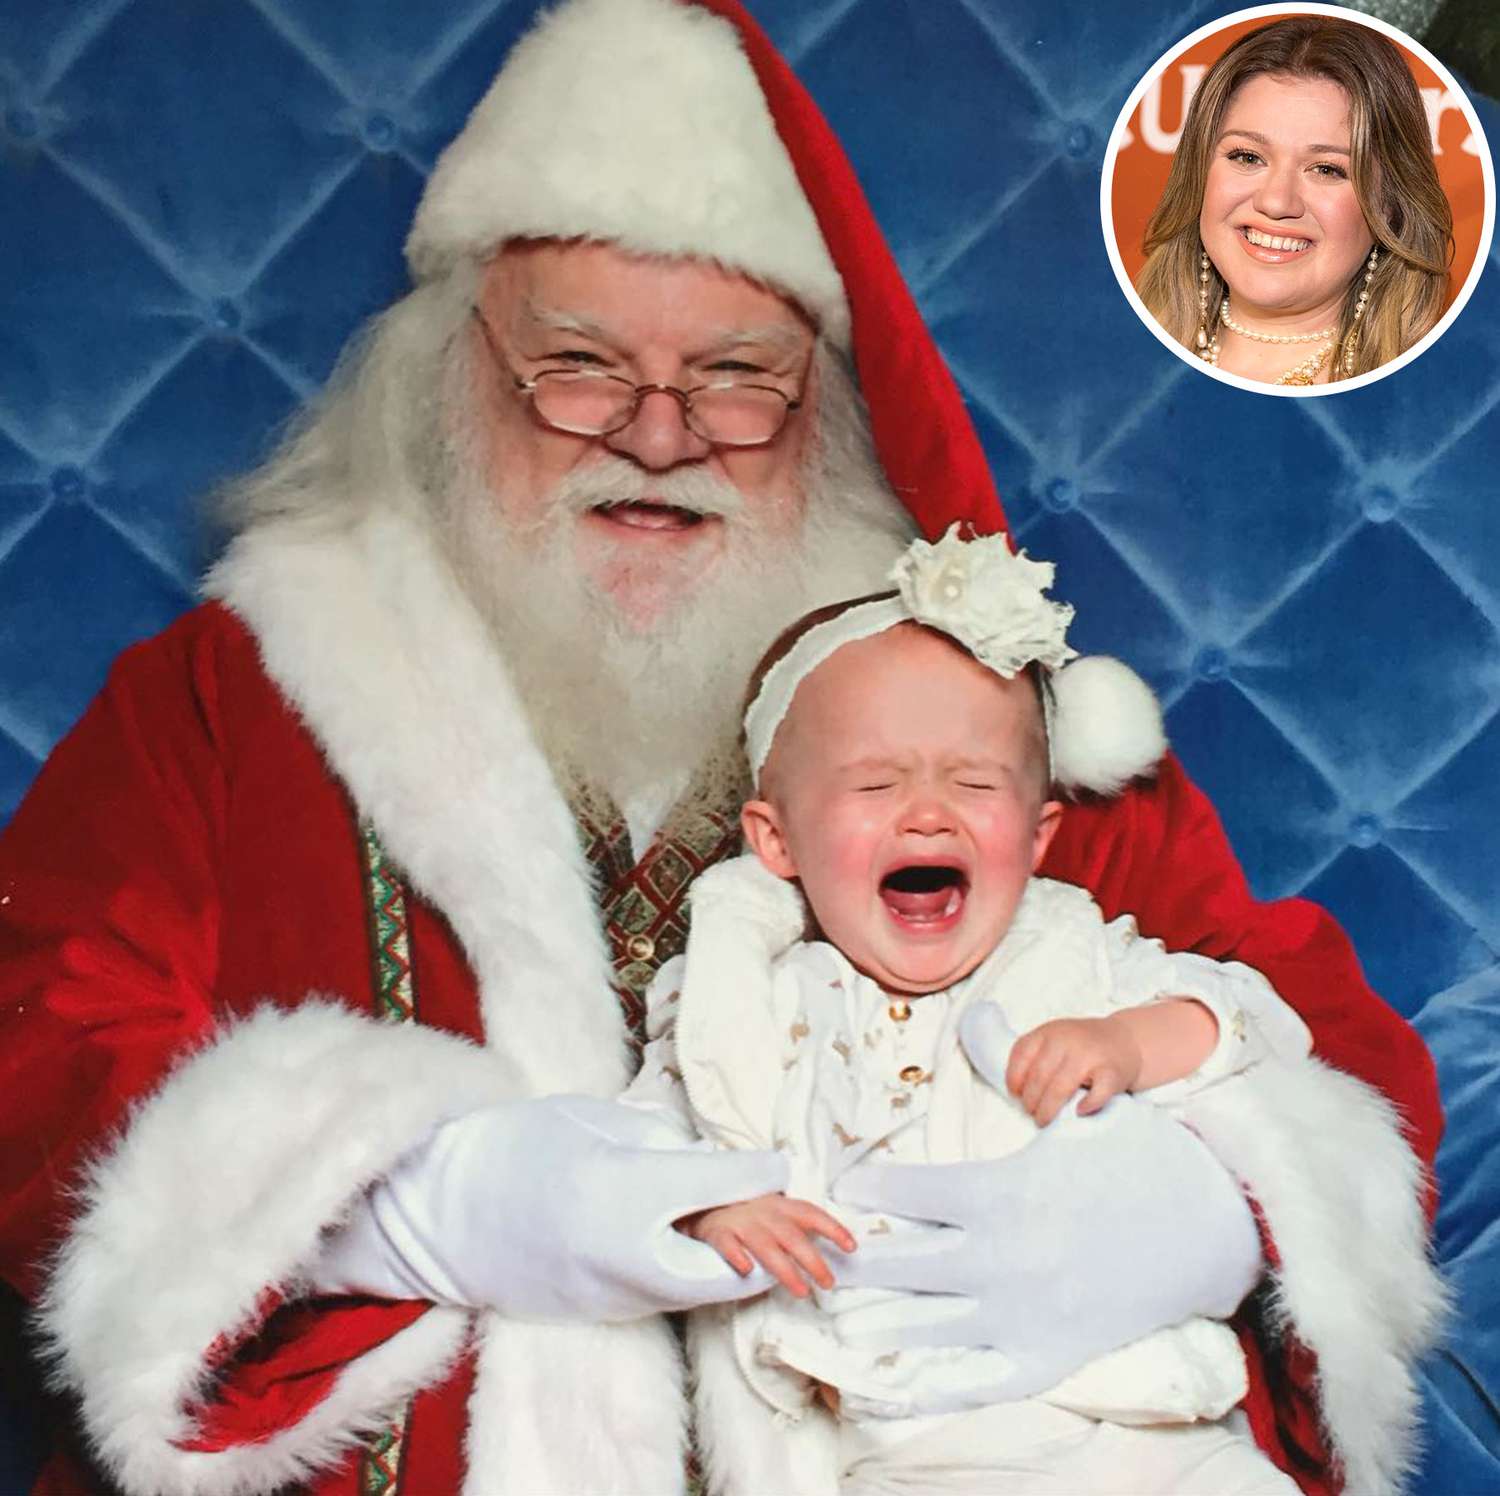 KELLY CLARKSON'S LITTLE GIRL SCREAMING DURING HER PHOTO WITH SANTA ...